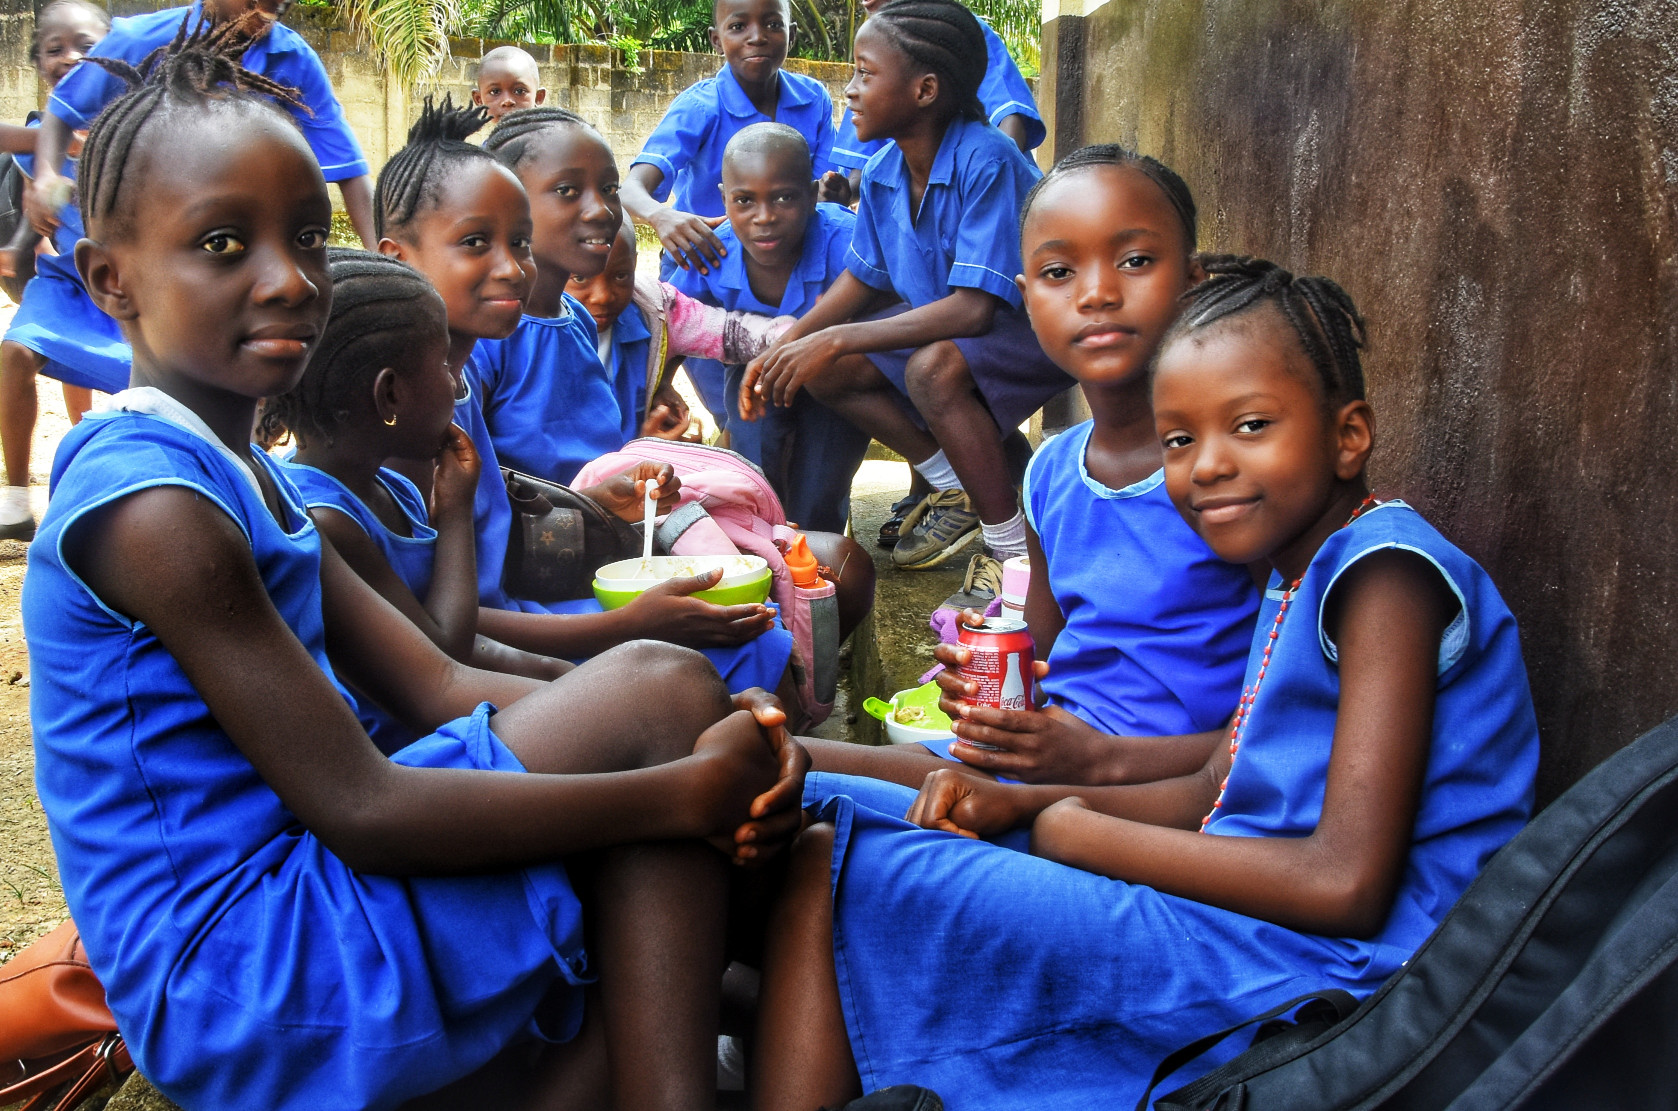 The changing education system in Sierra Leone